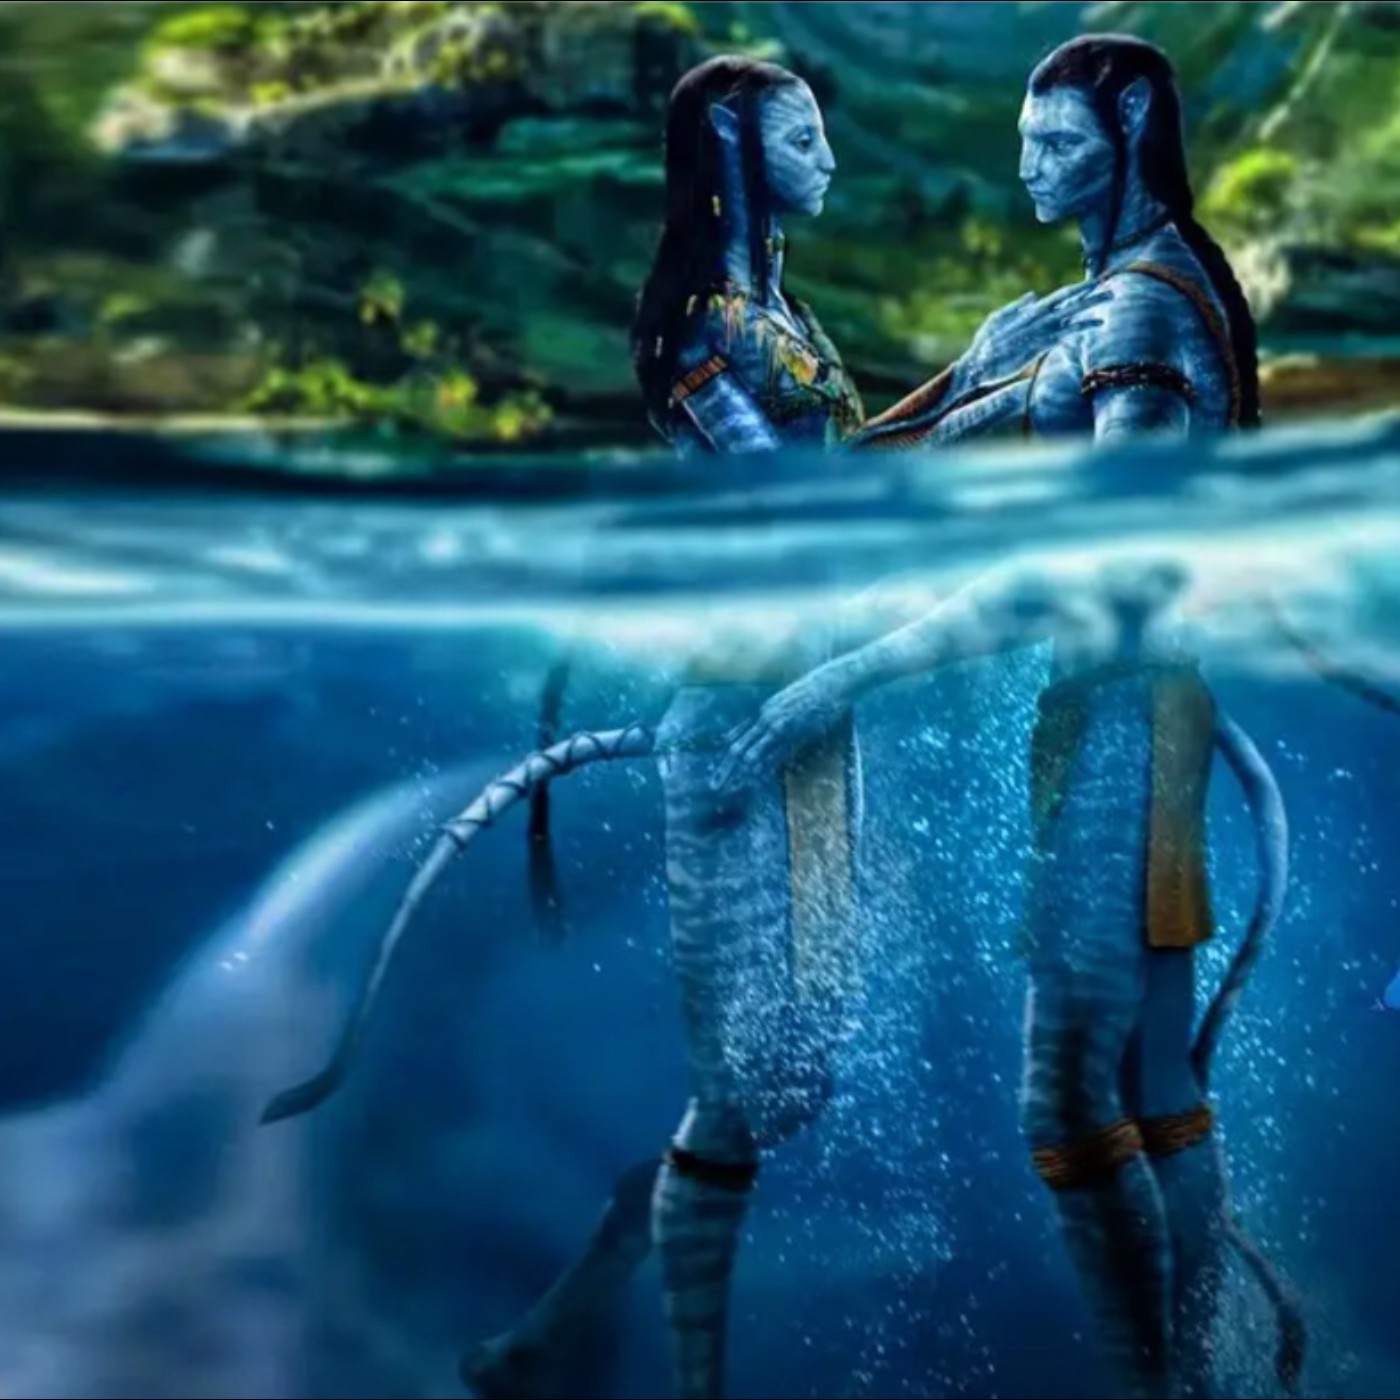 Crackstreams!^ Avatar 2 The Way of Water (2022) Fullmovie Watch Online Streaming For Free Podcast on SoundOn